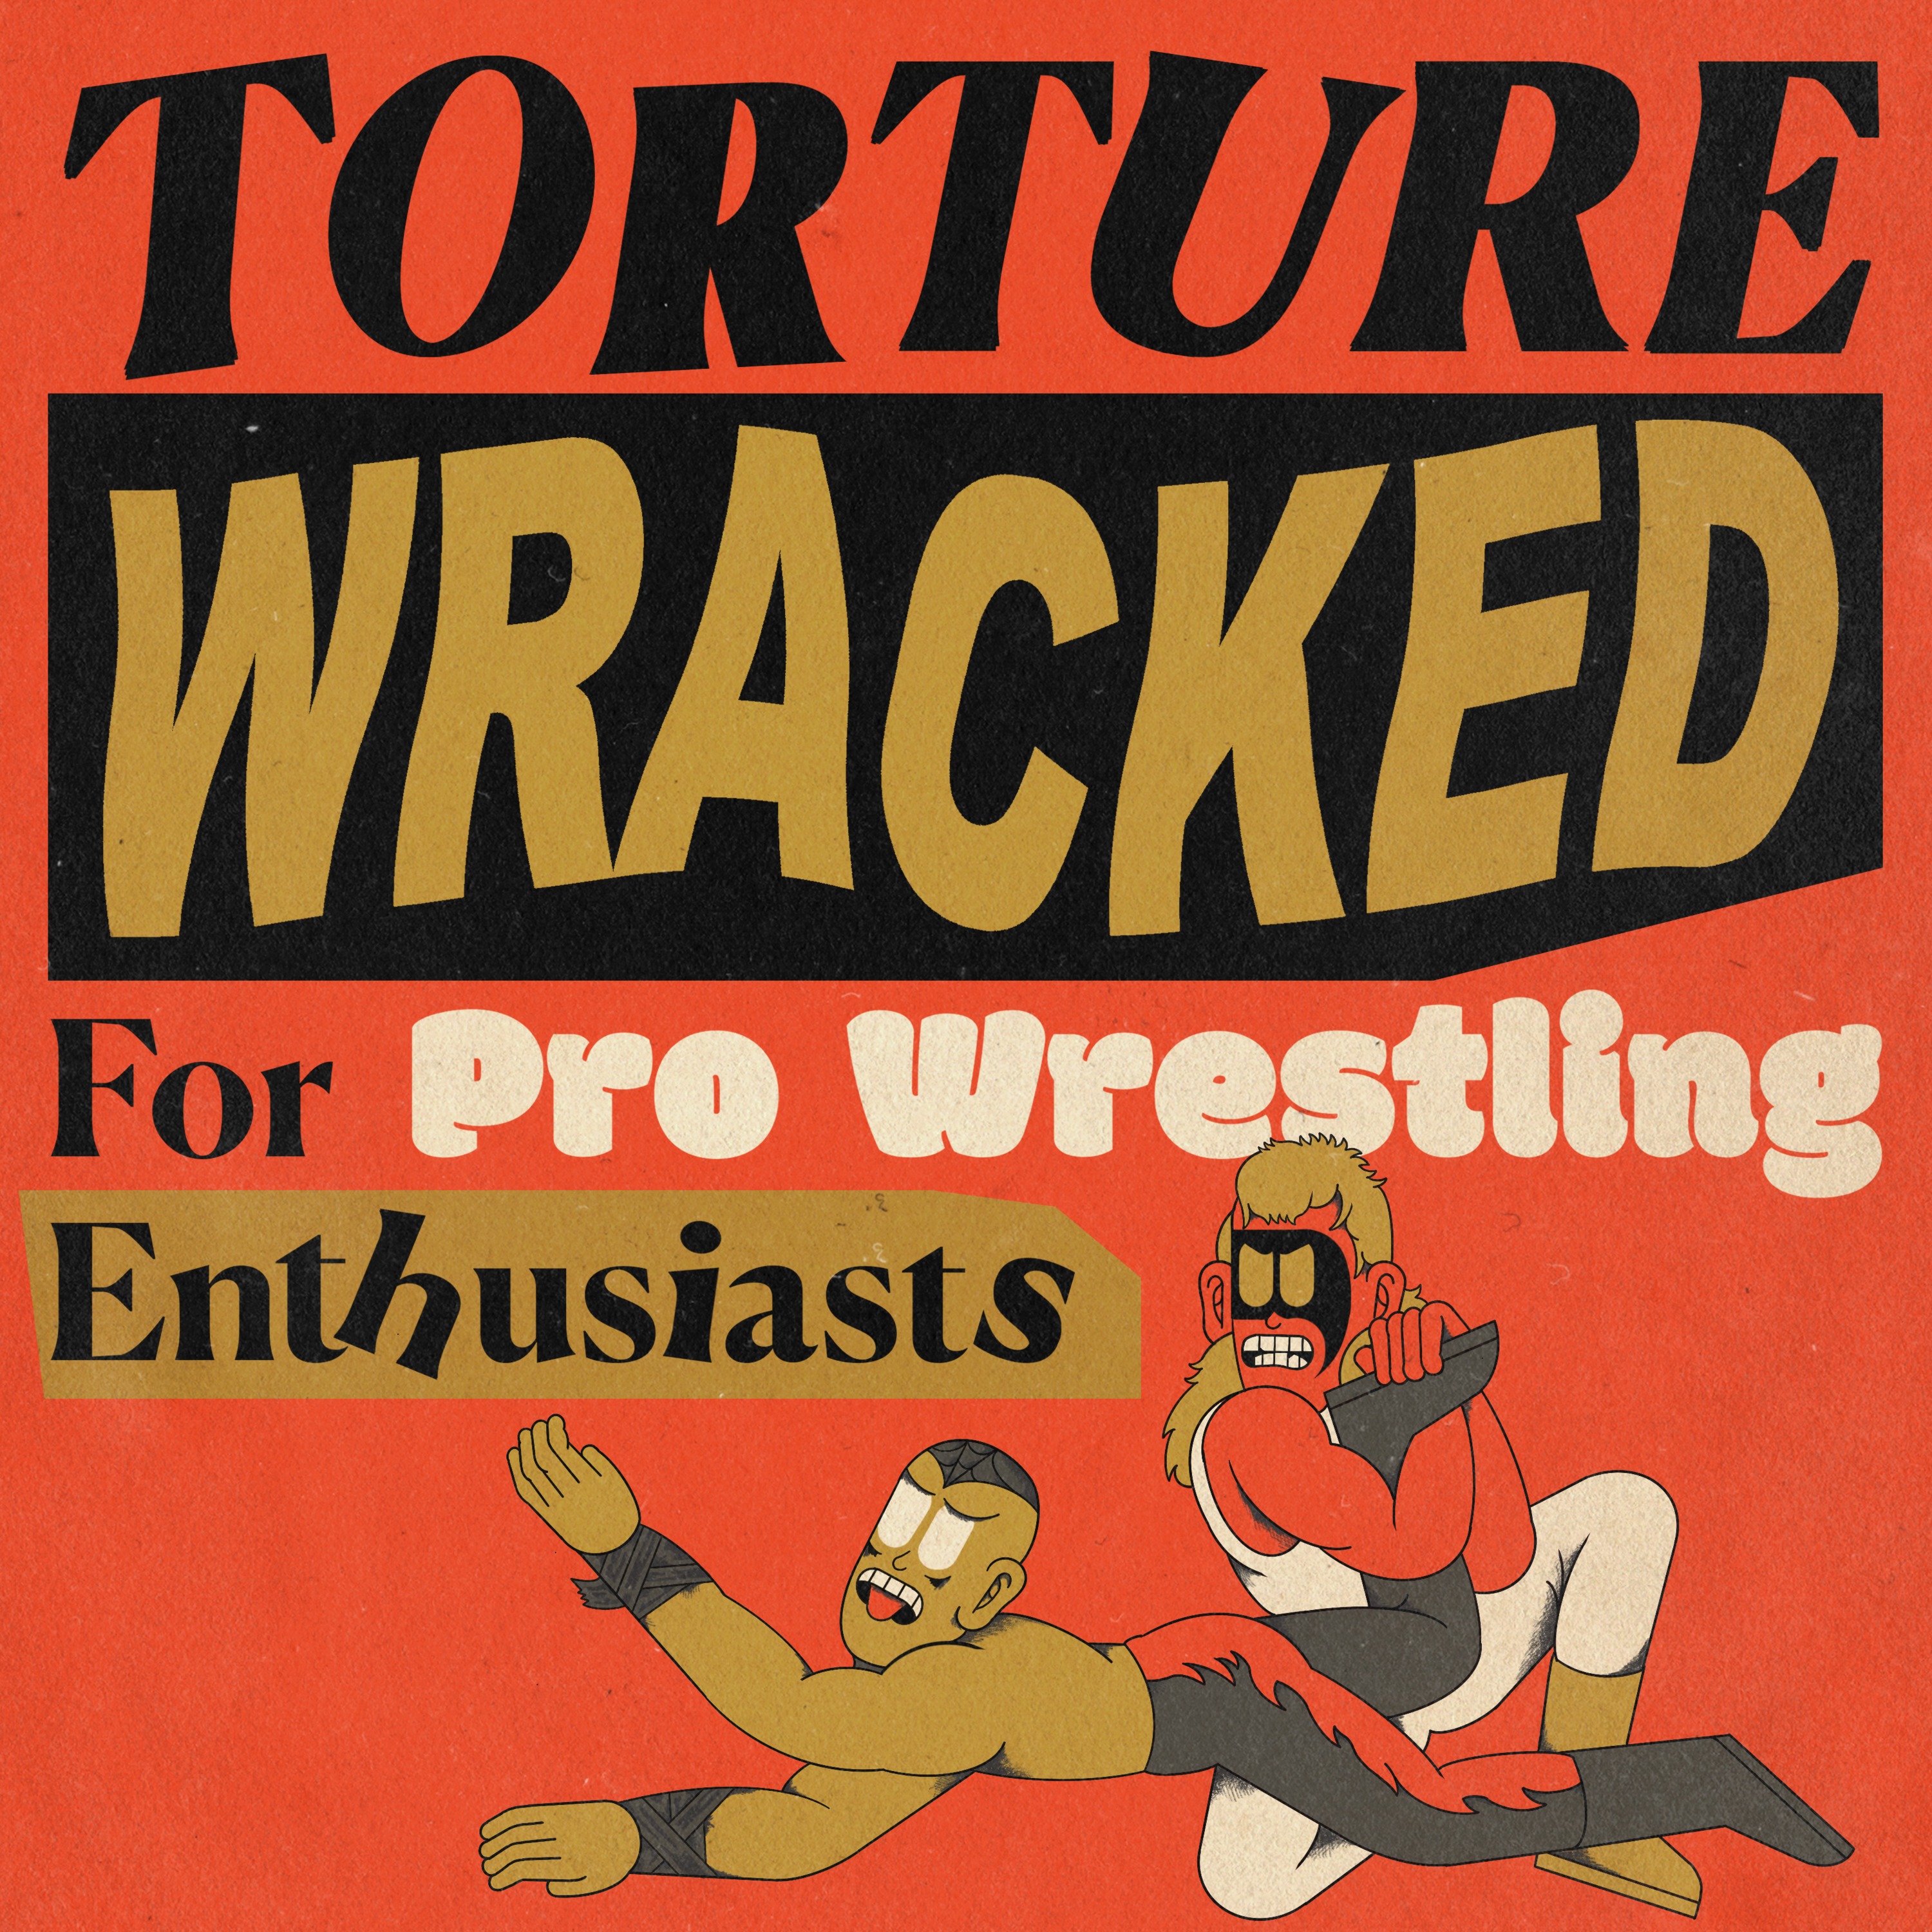 Torture Wracked